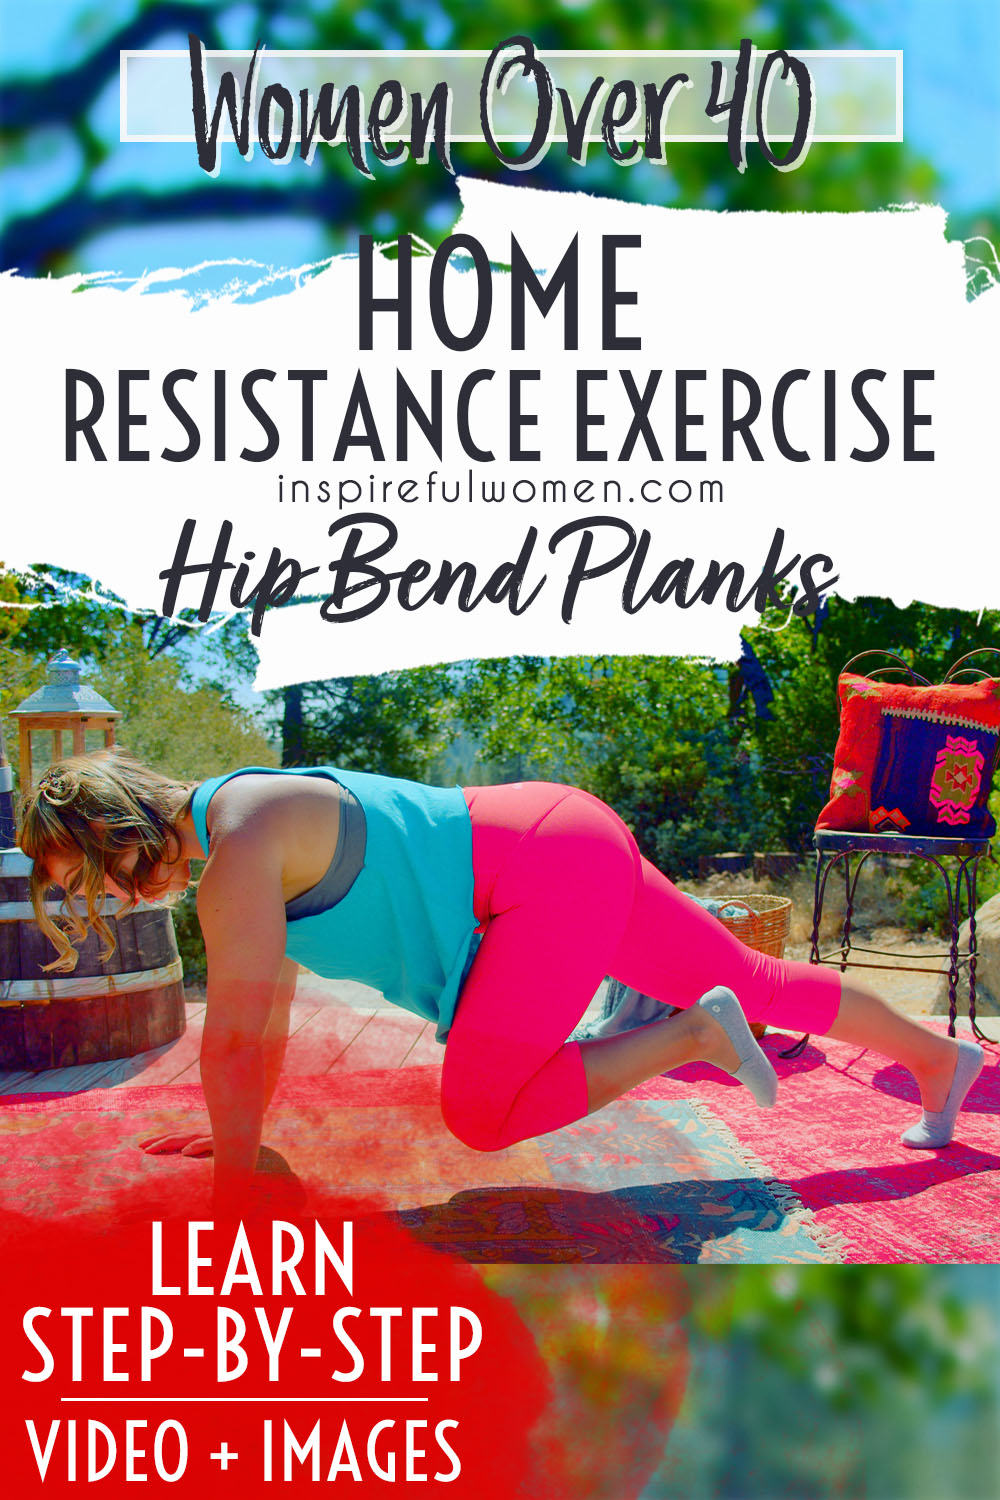 hip-bend-plank-variation-bodyweight-core-ab-stability-exercise-at-home-women-over-40